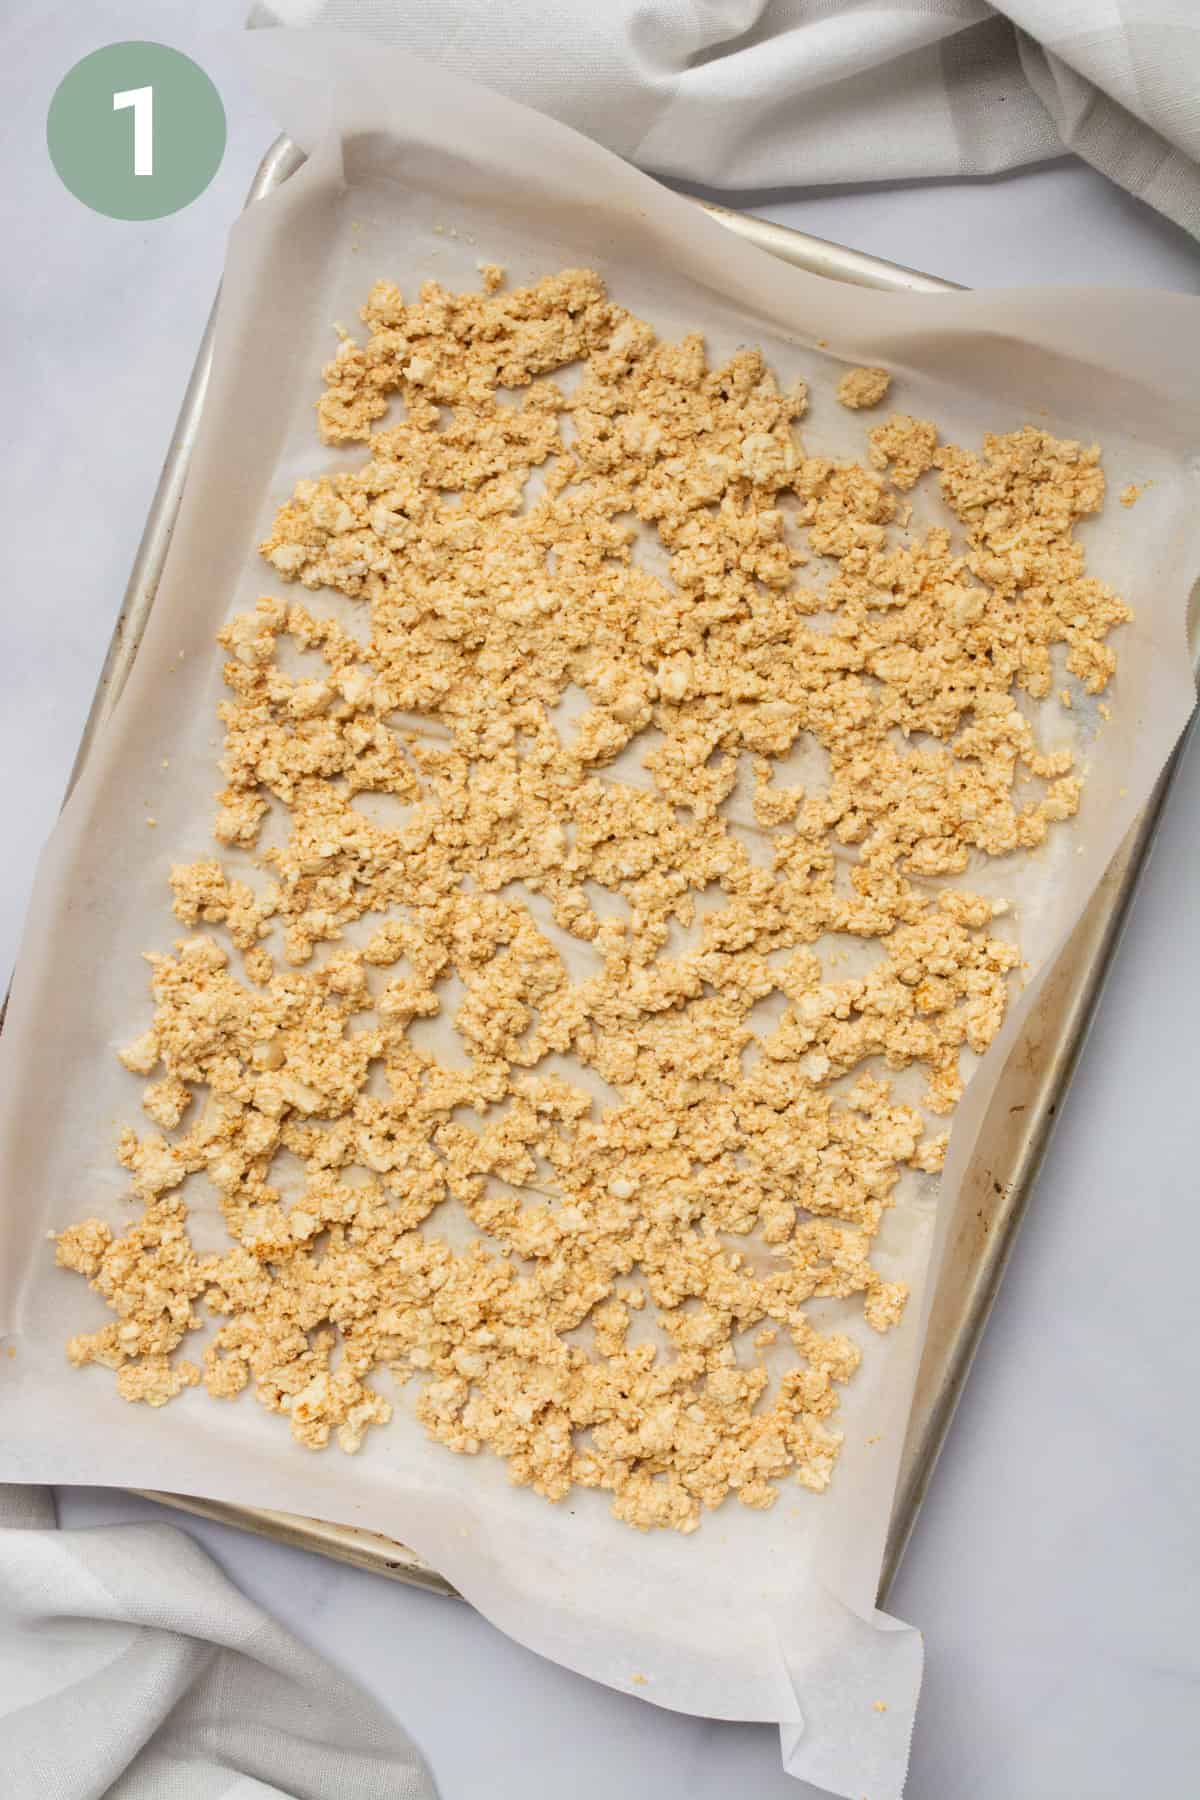 Crumbled tofu on a baking sheet lined with parchment paper.